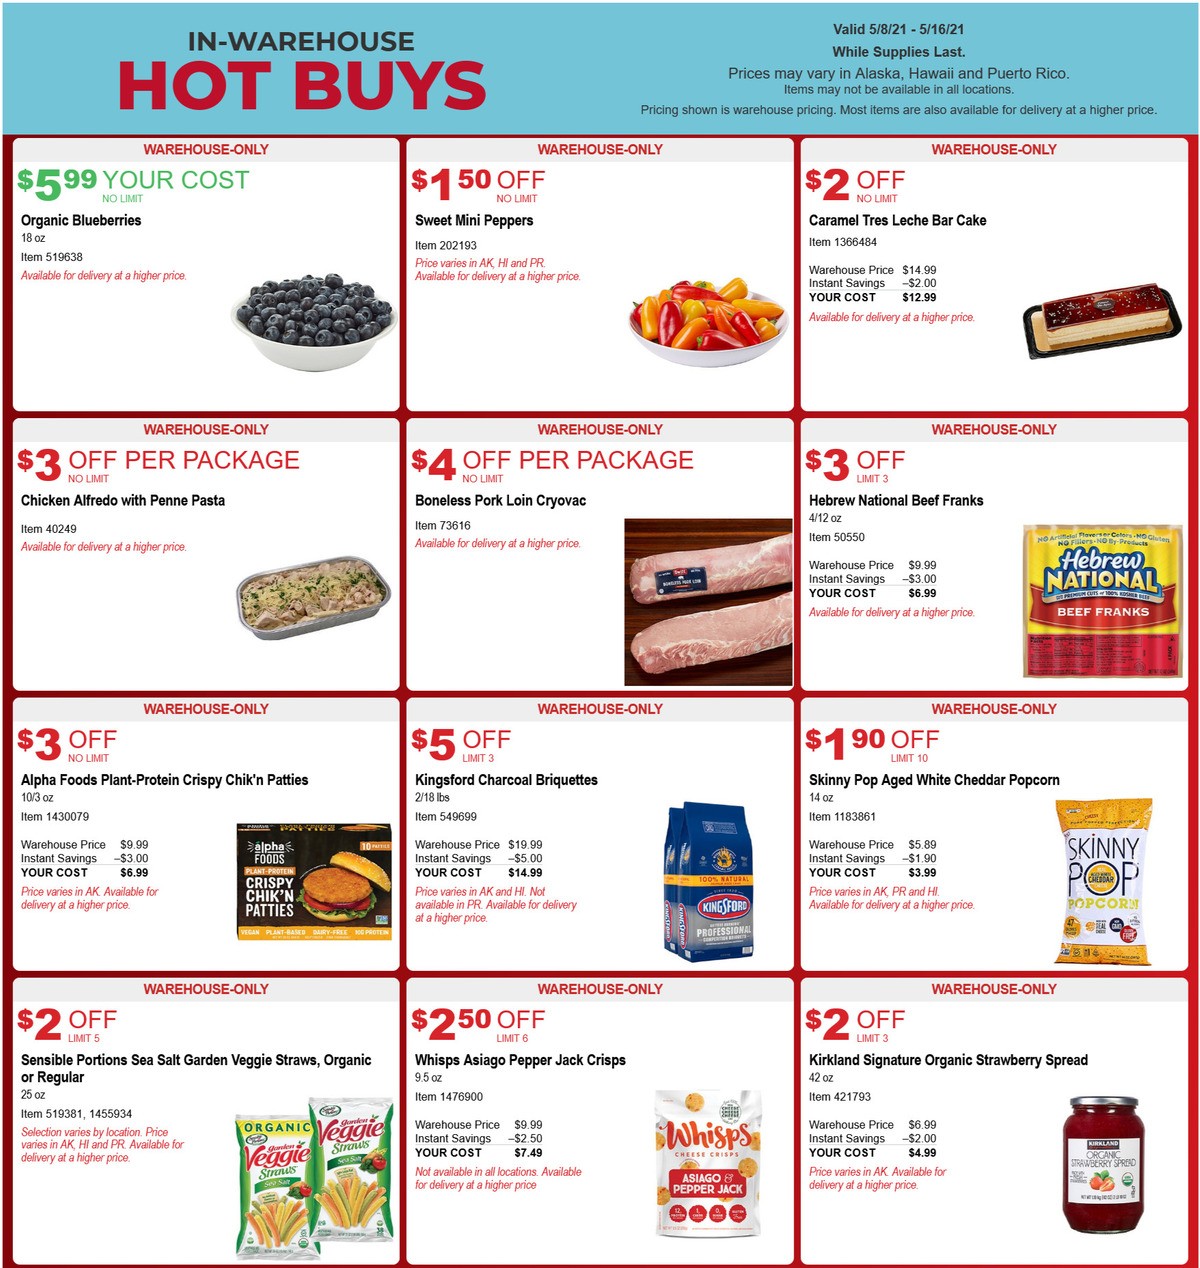 Costco Hot Buys Special Buys and Warehouse Savings from May 8